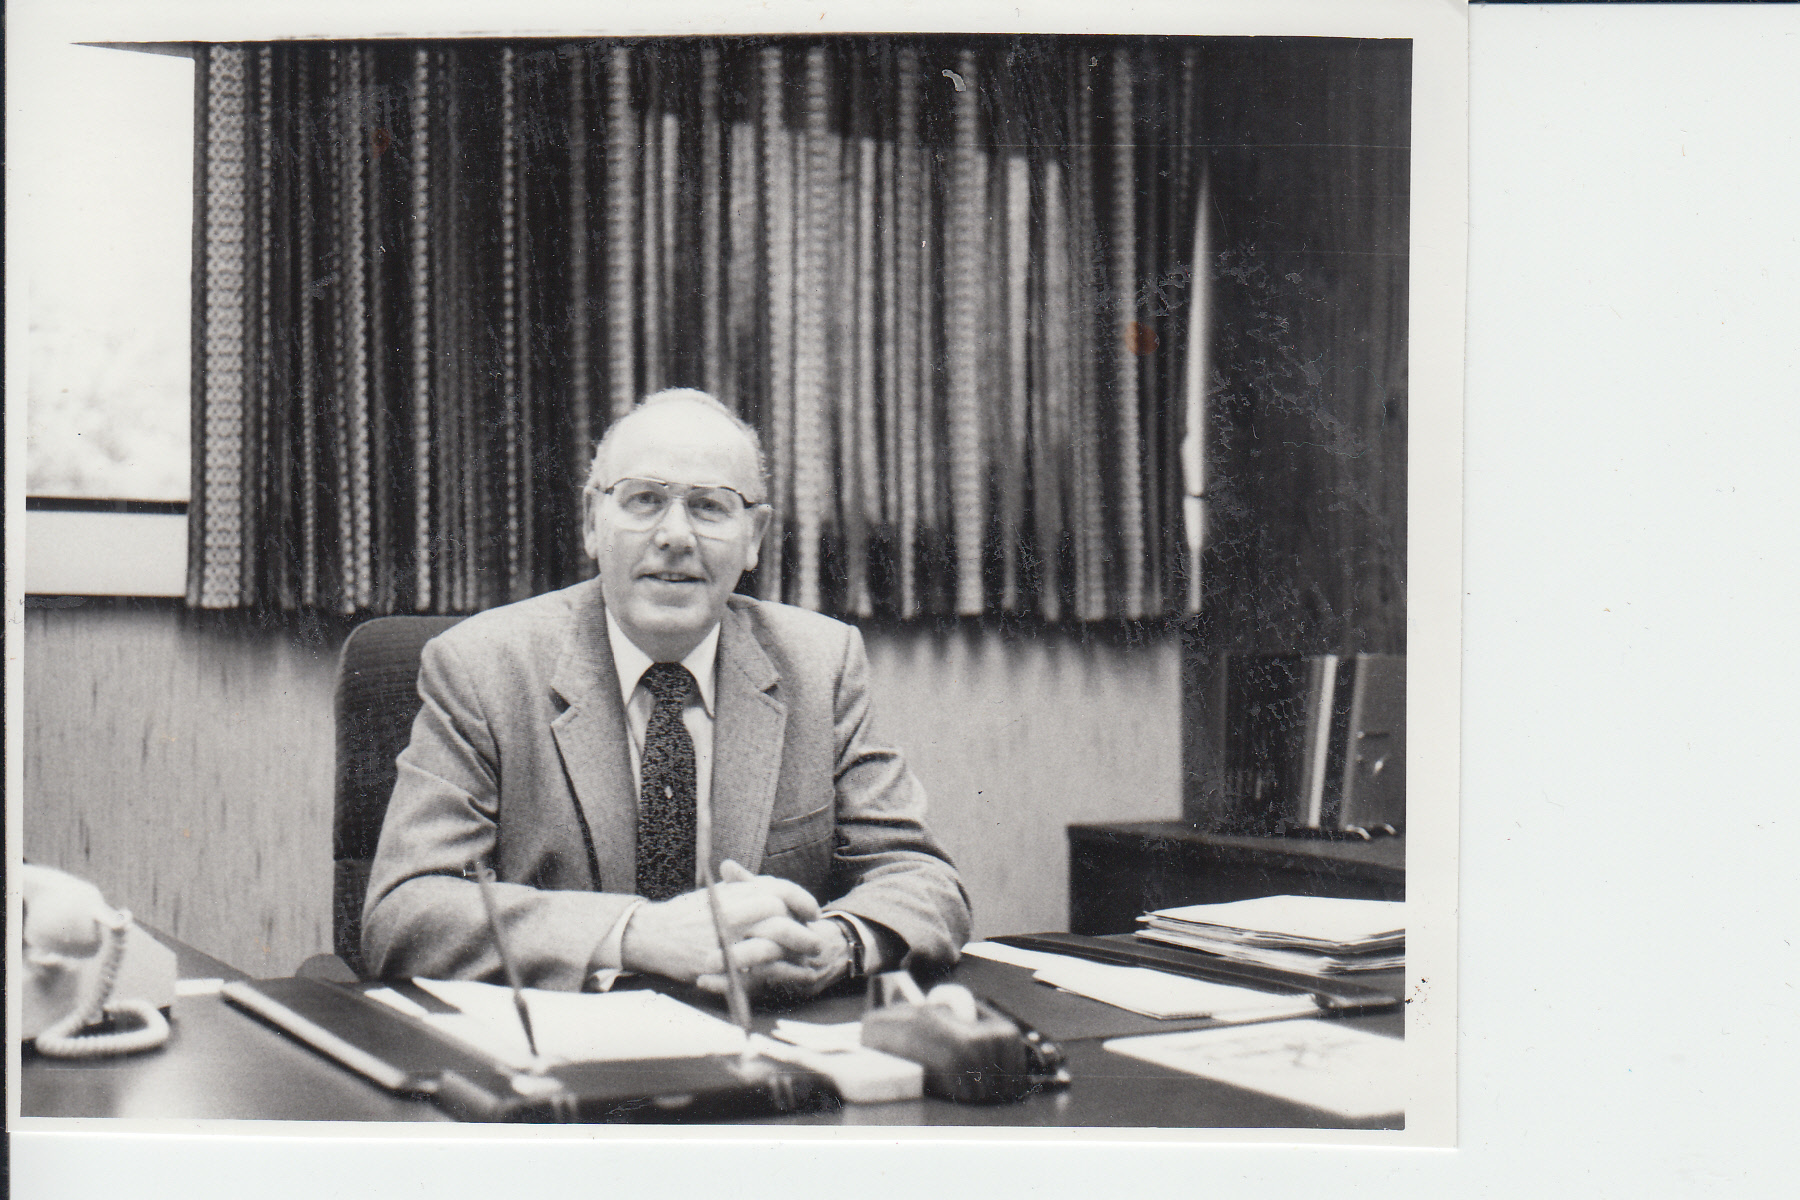 6 - Robert Taitinger at his desk in an undated photo.